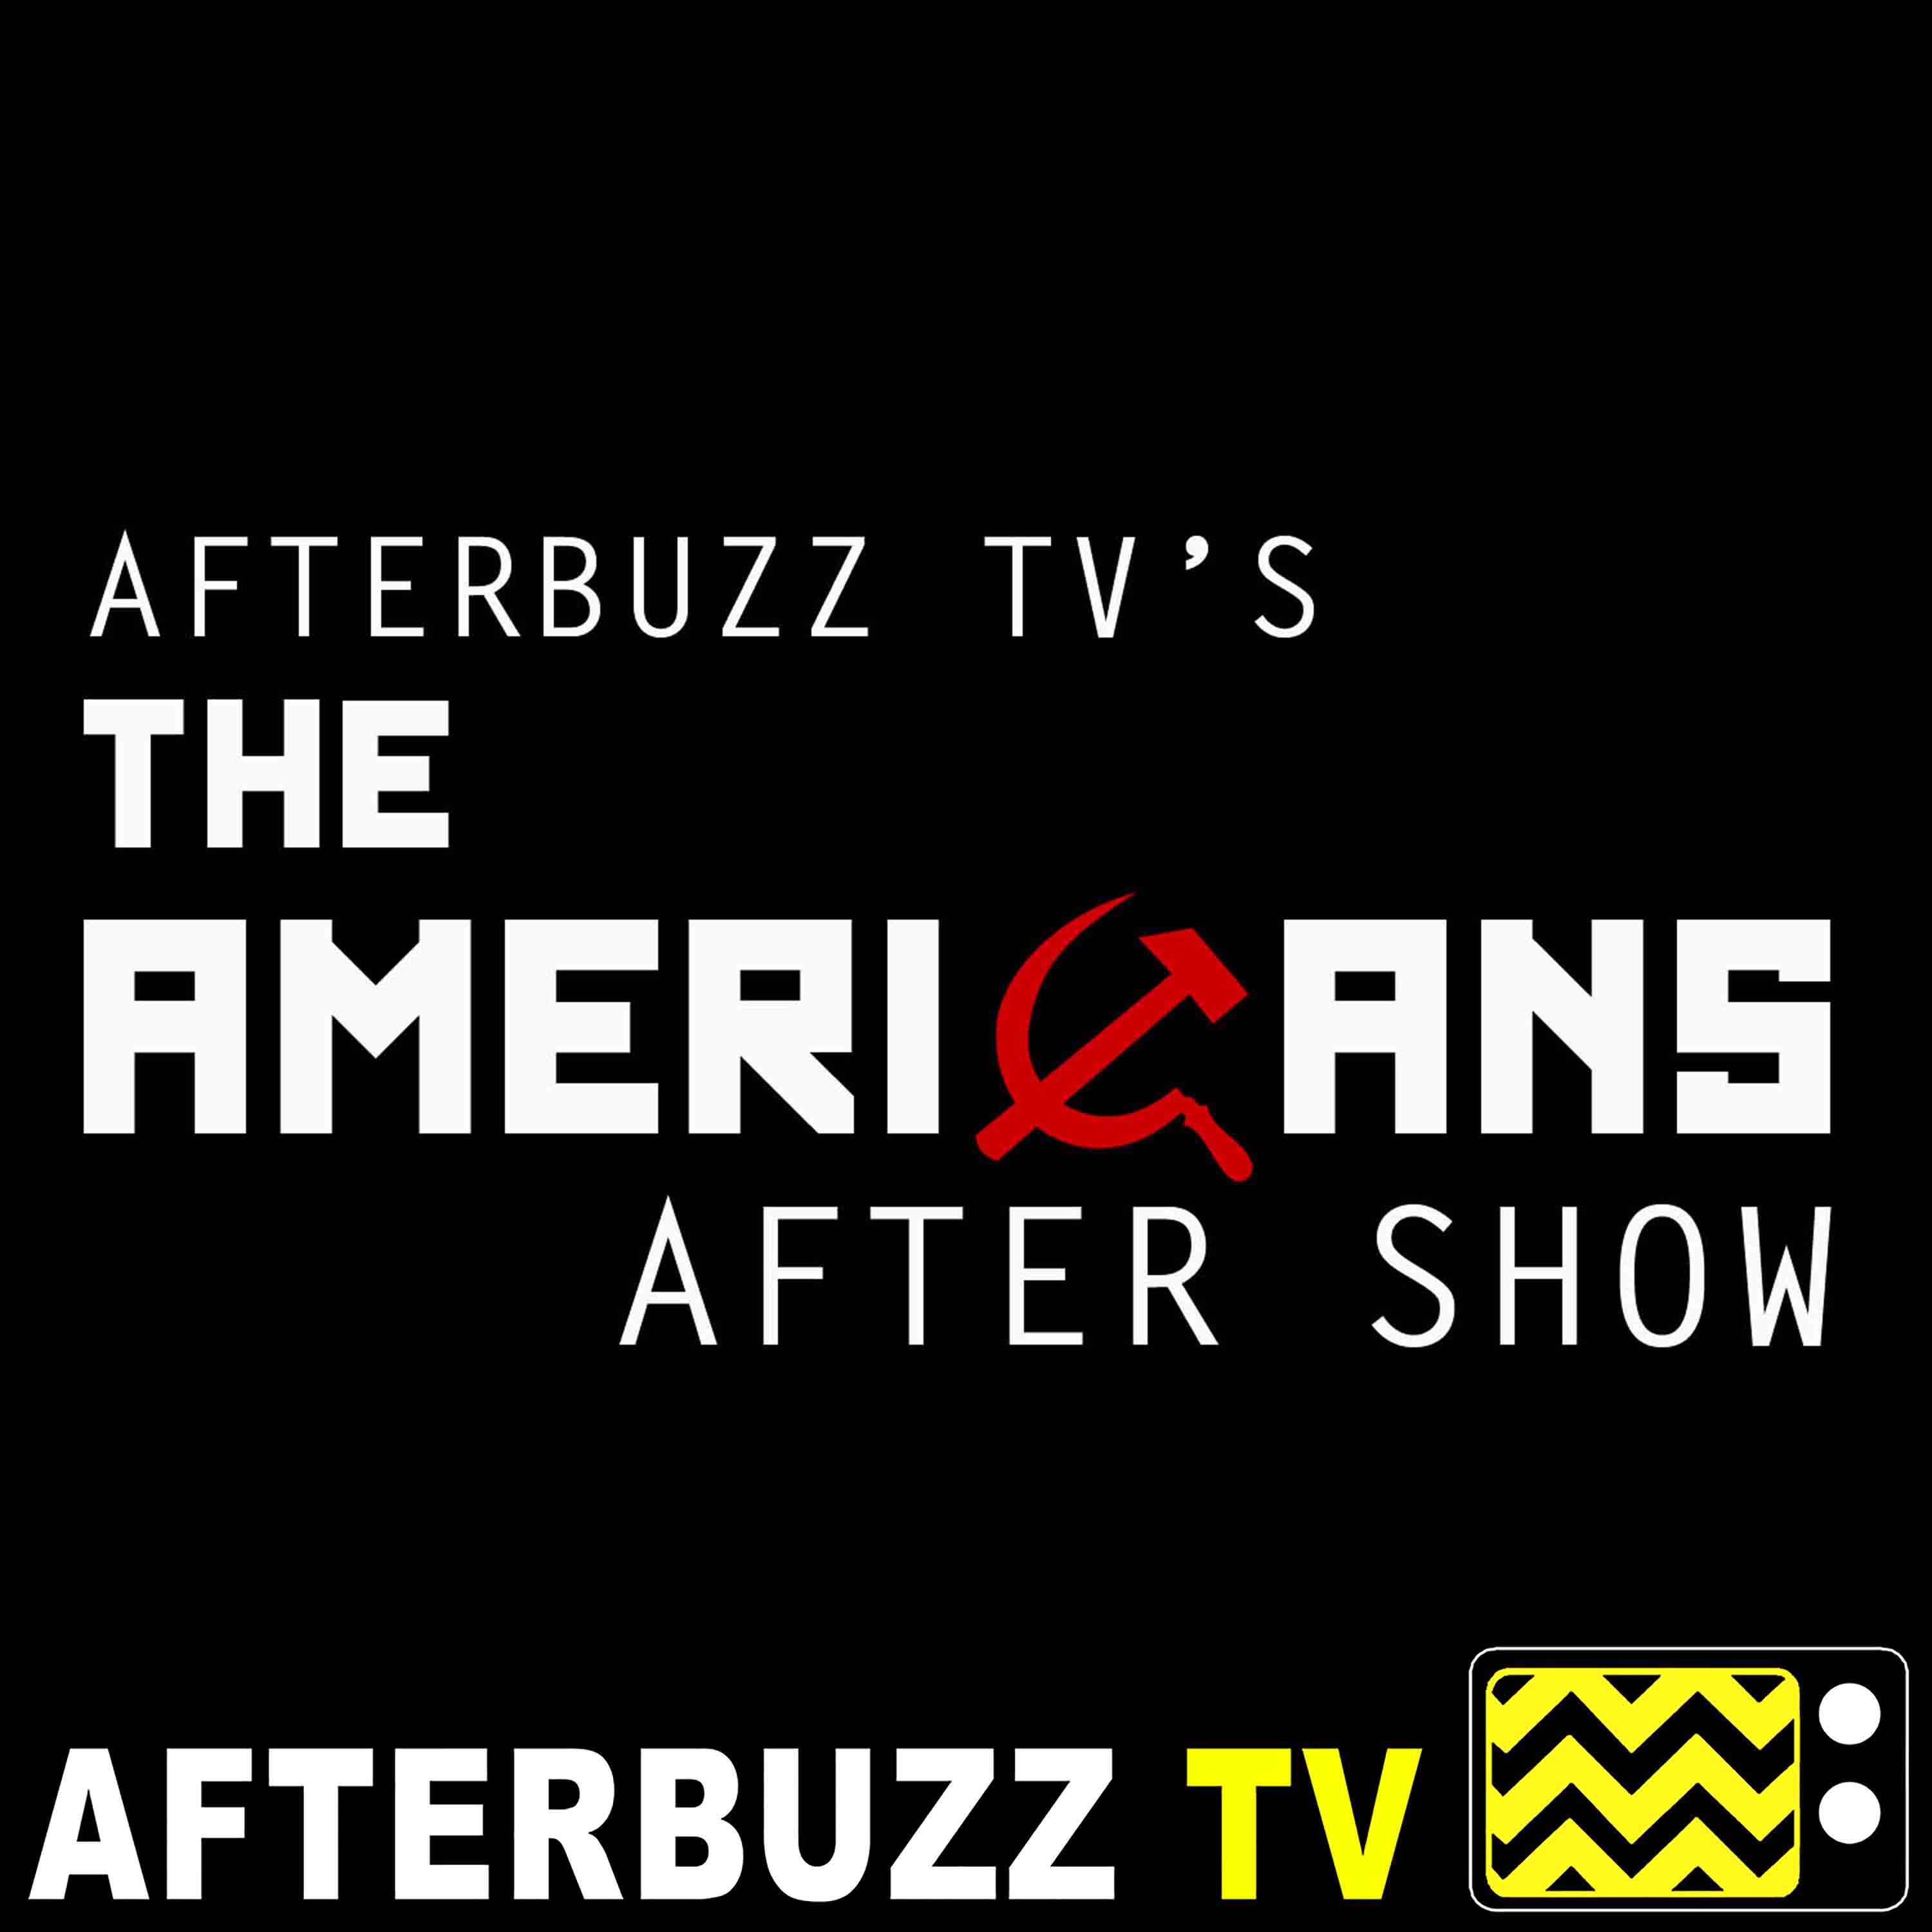 The Americans S:6 | Urban Transport Planning E:3 | AfterBuzz TV AfterShow